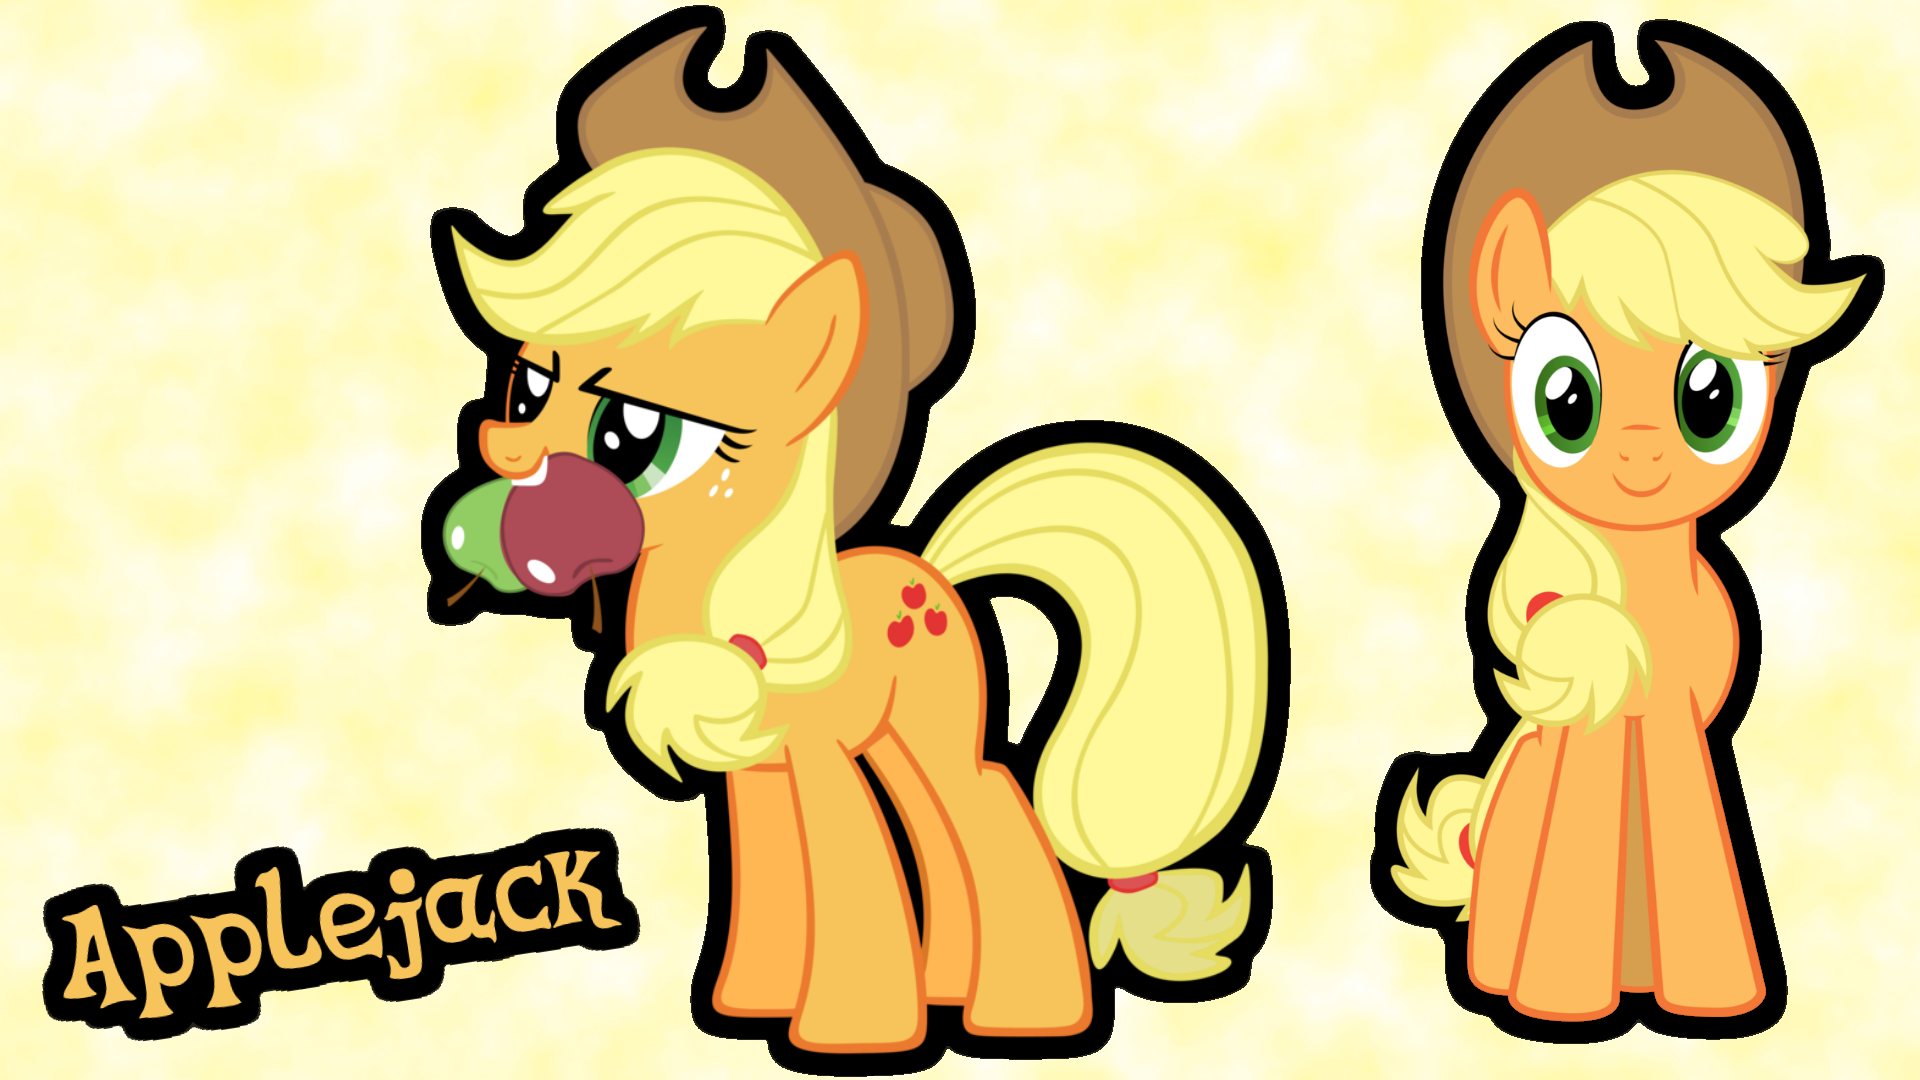 Applejack Wallpaper by IocainePower, jrrhack and stewartisme